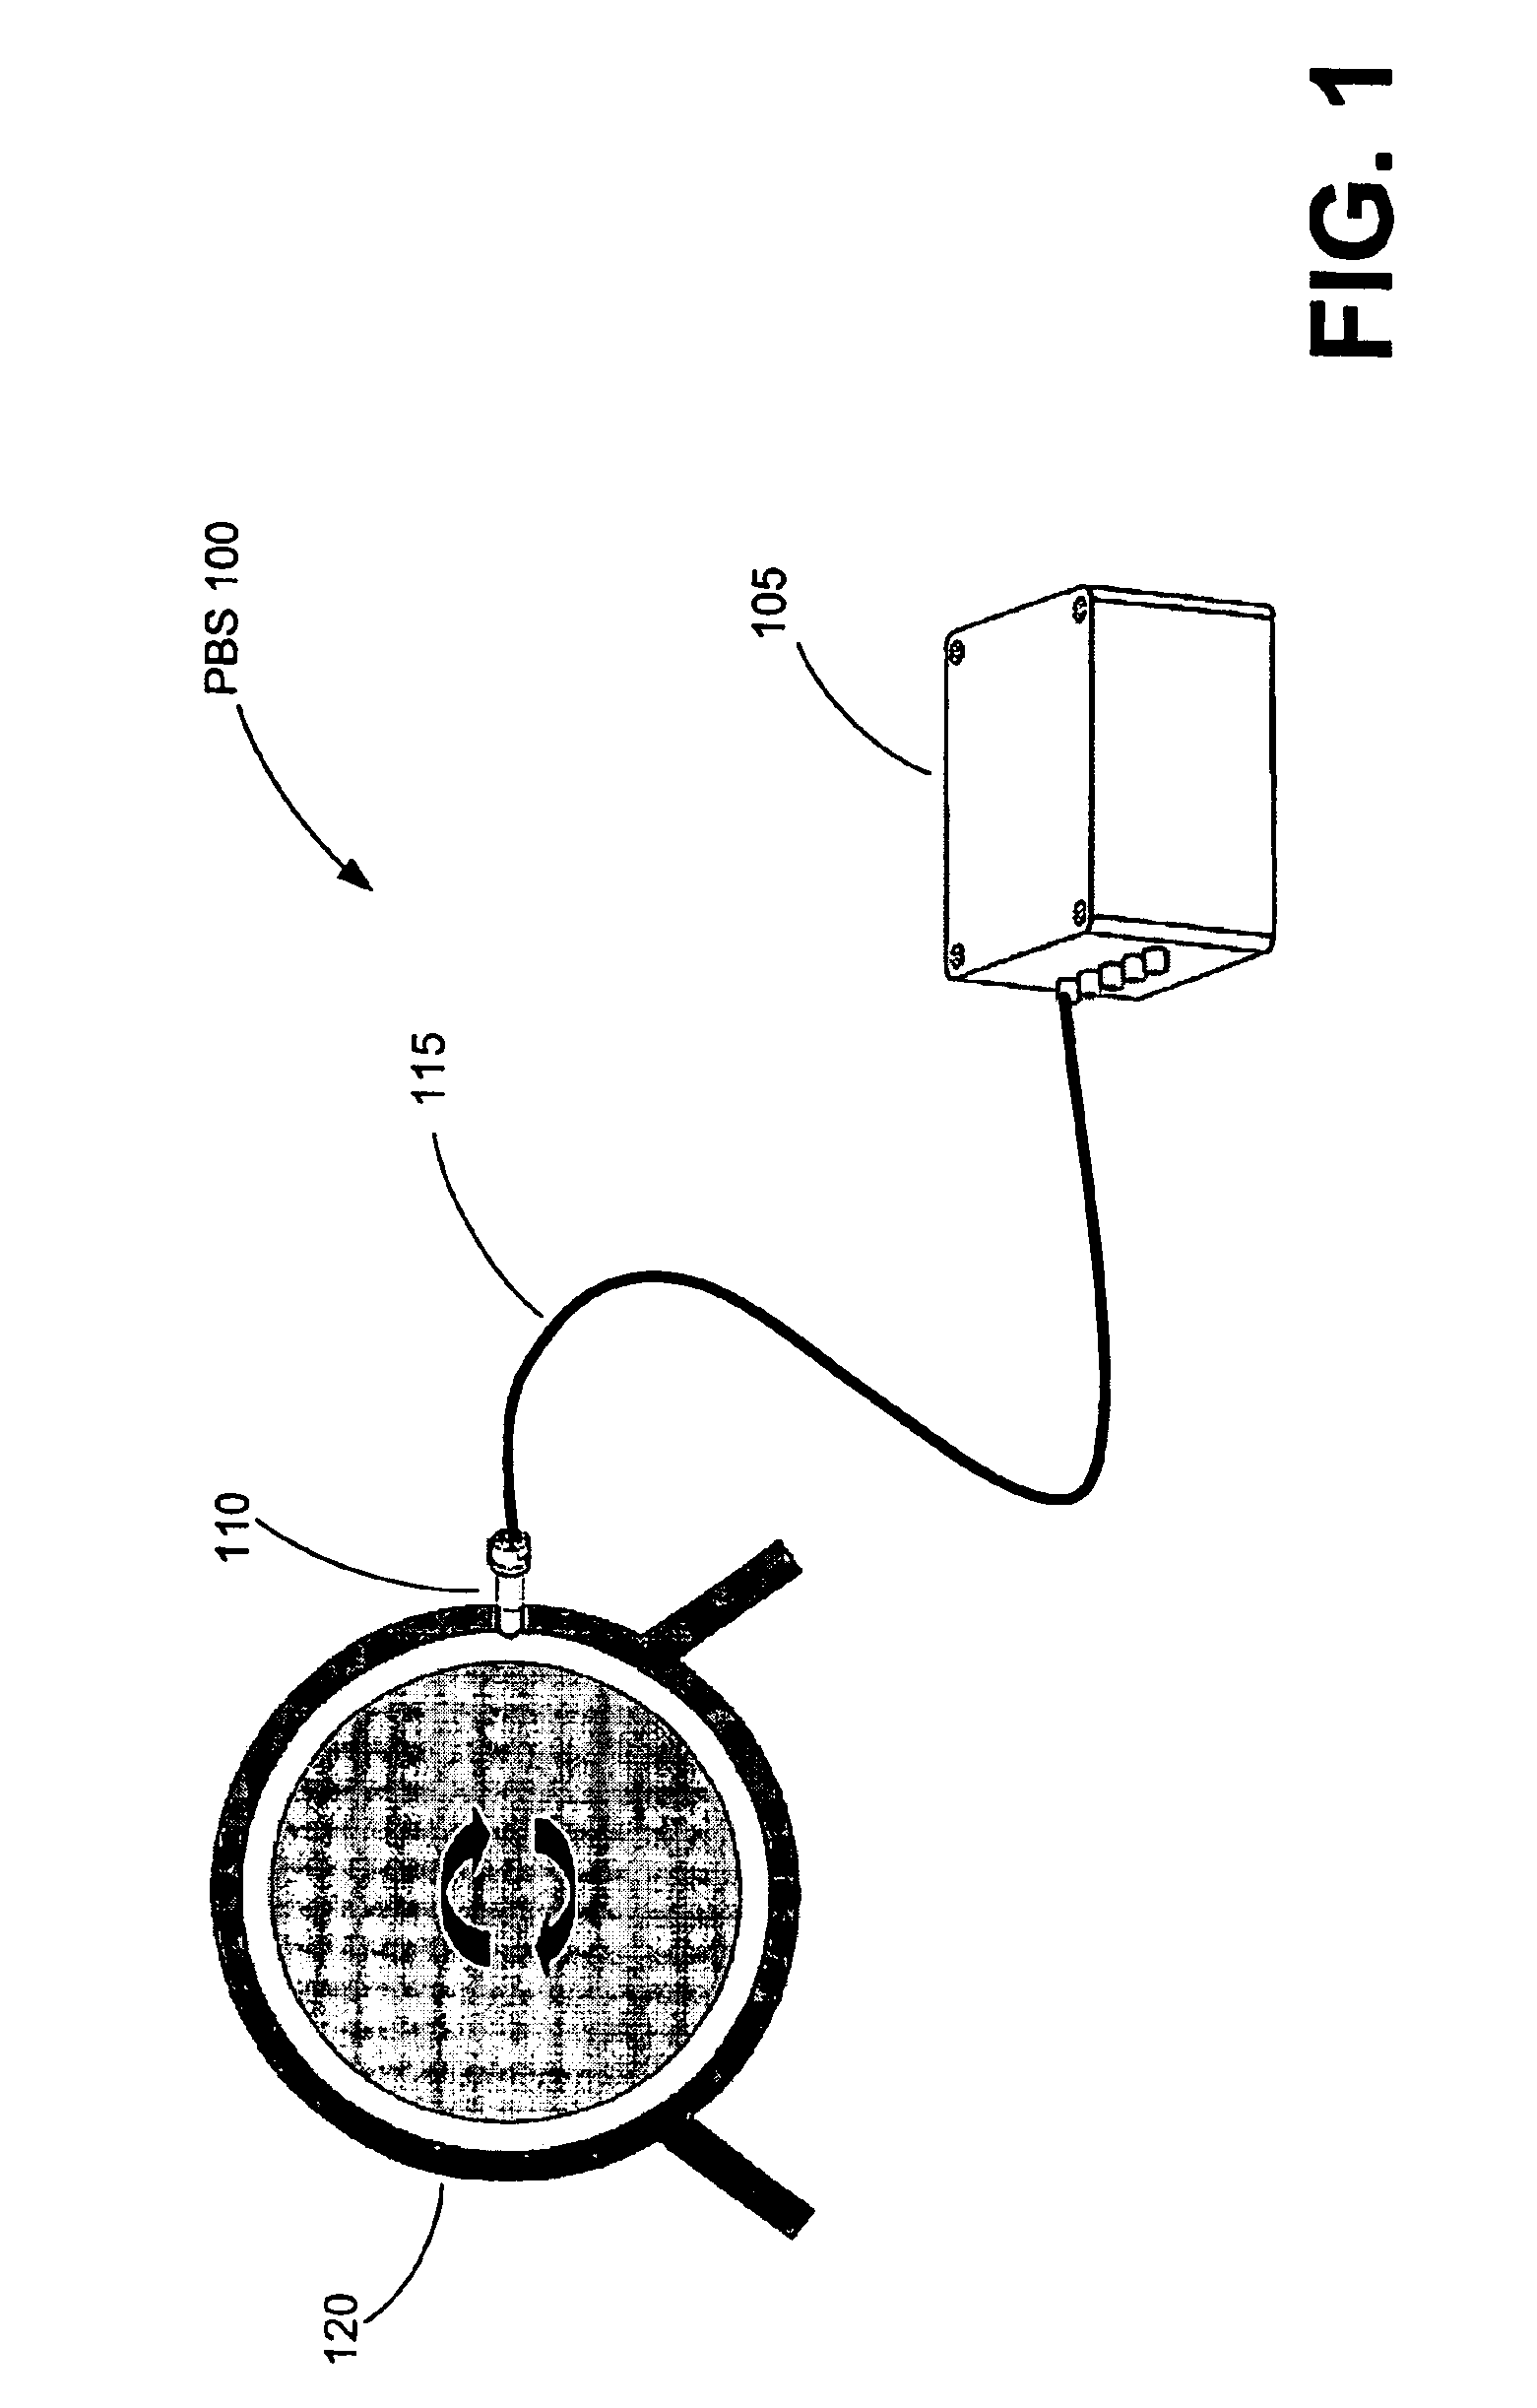 Method and system for calibration of a phase-based sensing system